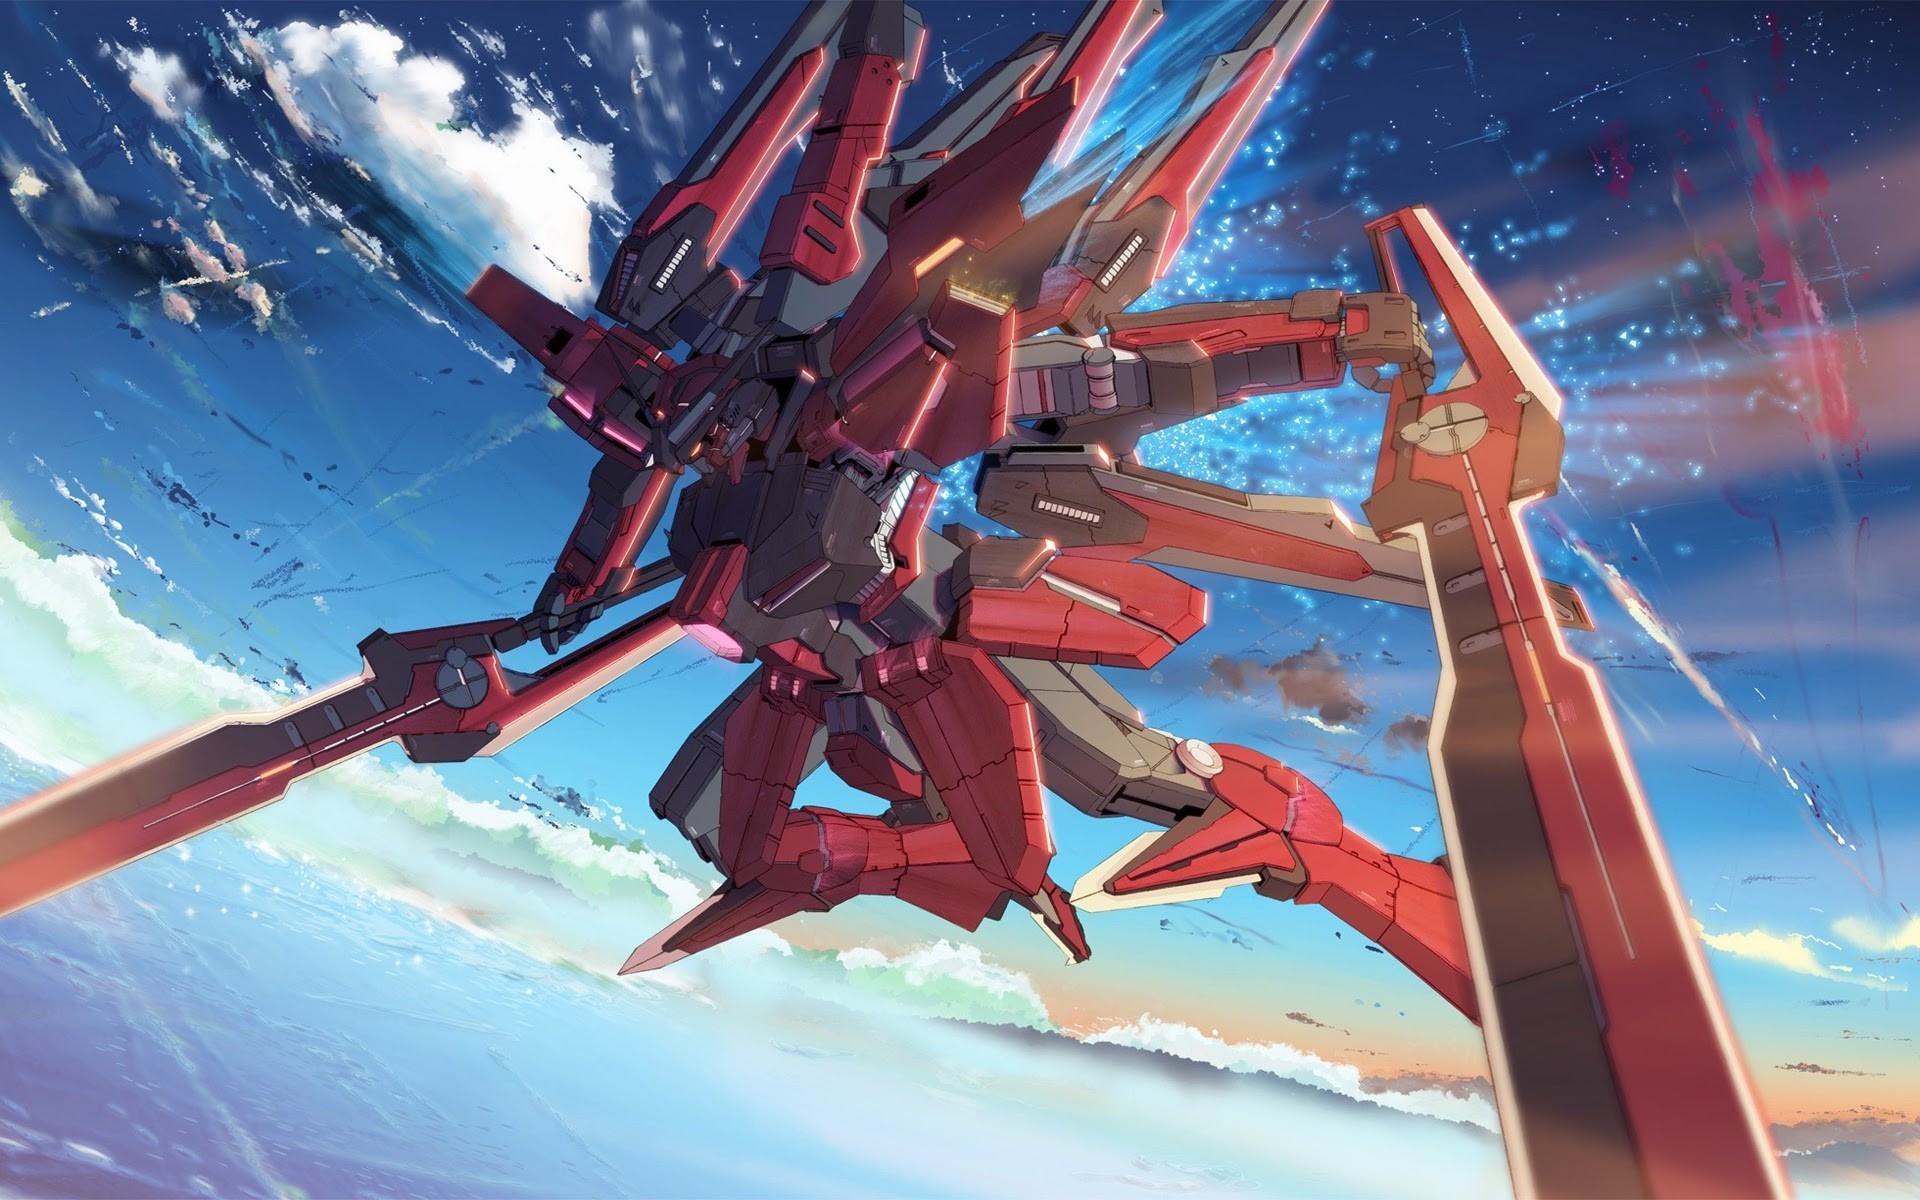 1920x1200 Download Gundam Exia wallpapers to your cell phone exia gundam | HD  Wallpapers | Pinterest | Gundam, Gundam 00 and Hd wallpaper